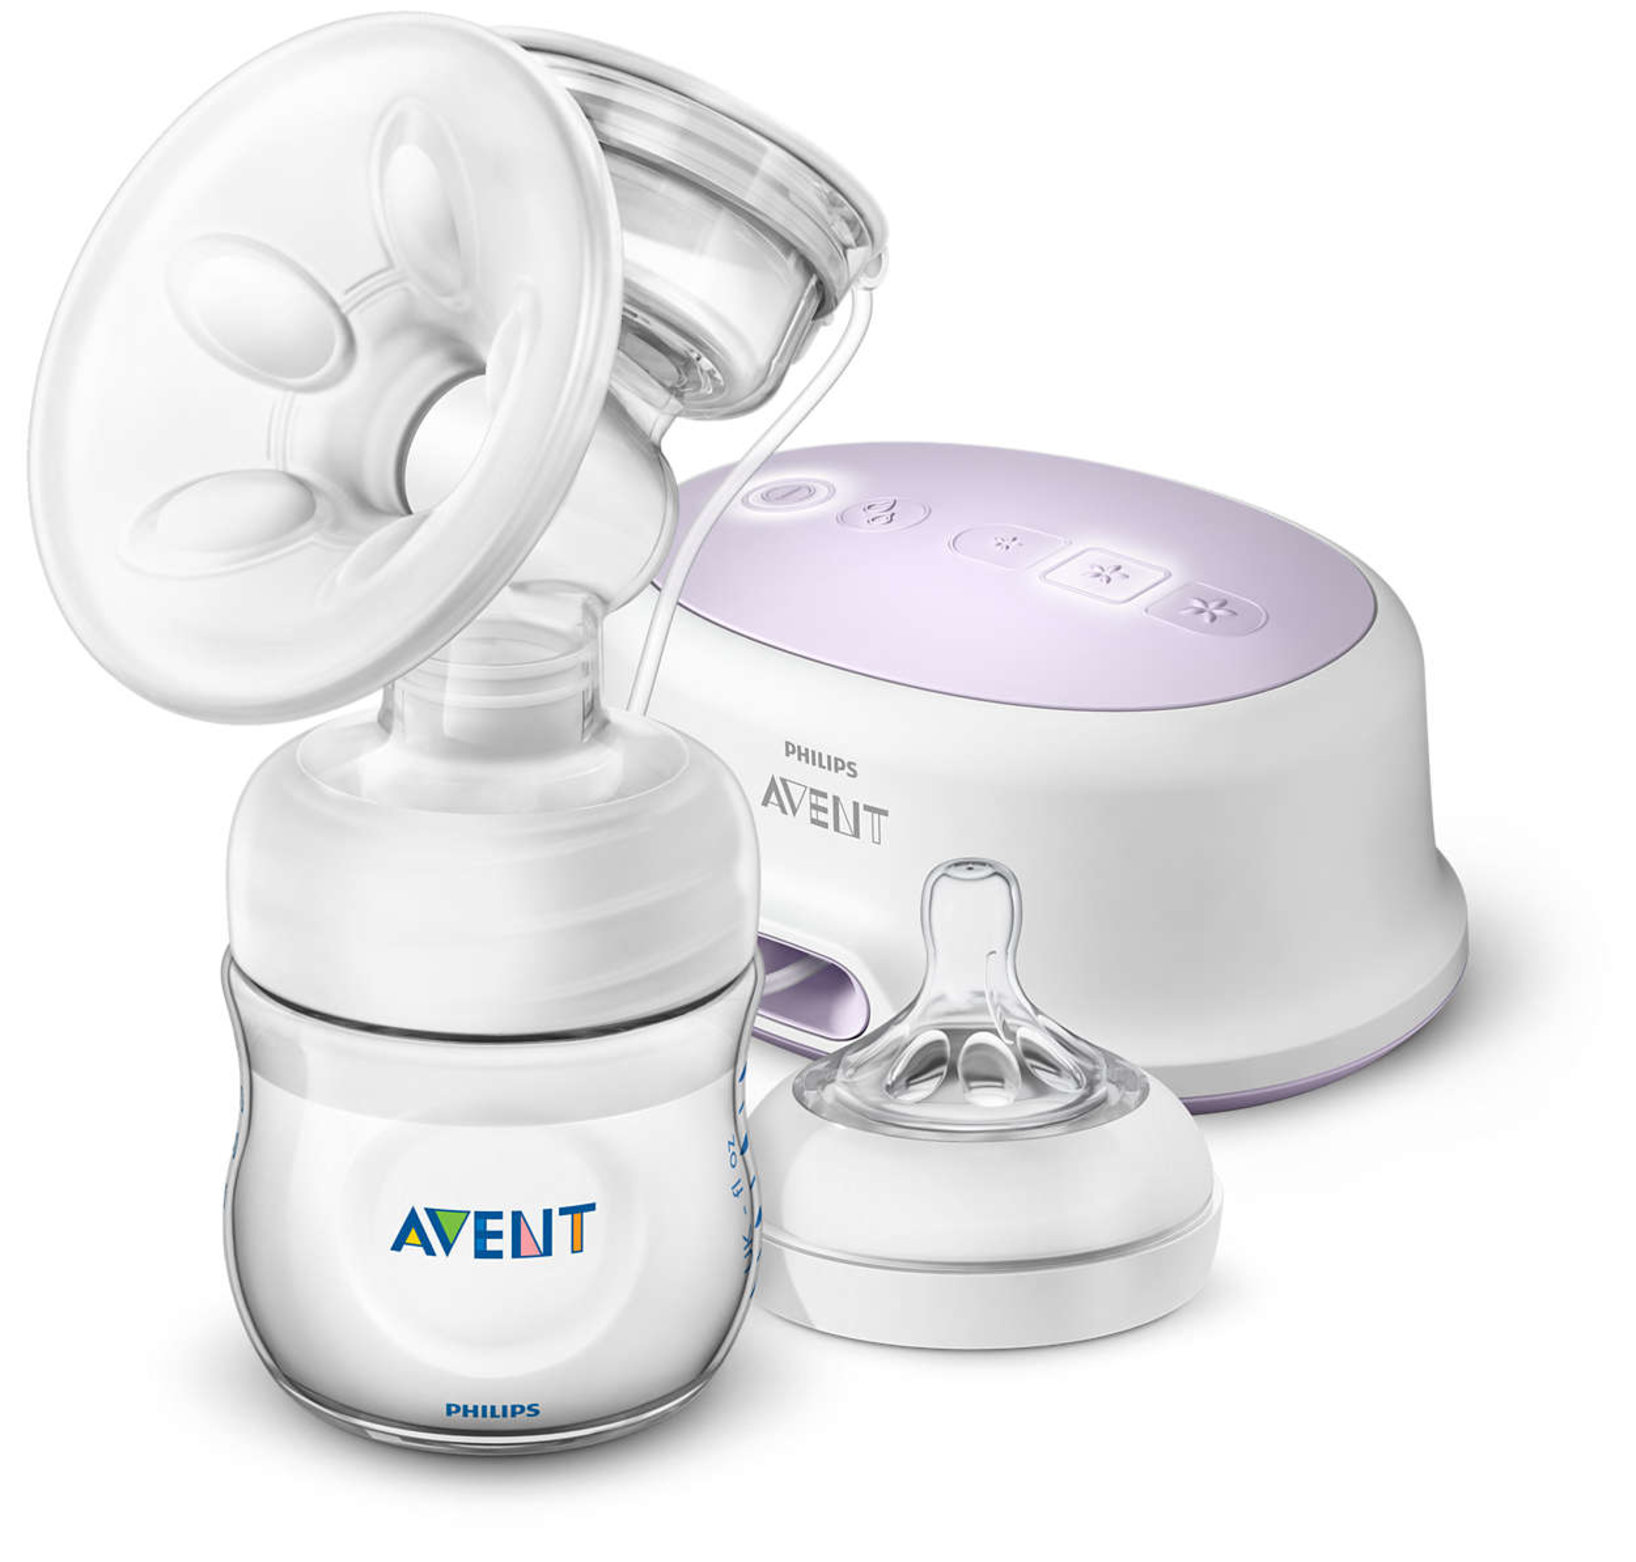 Avent Breast Pump - Baby Friendly 